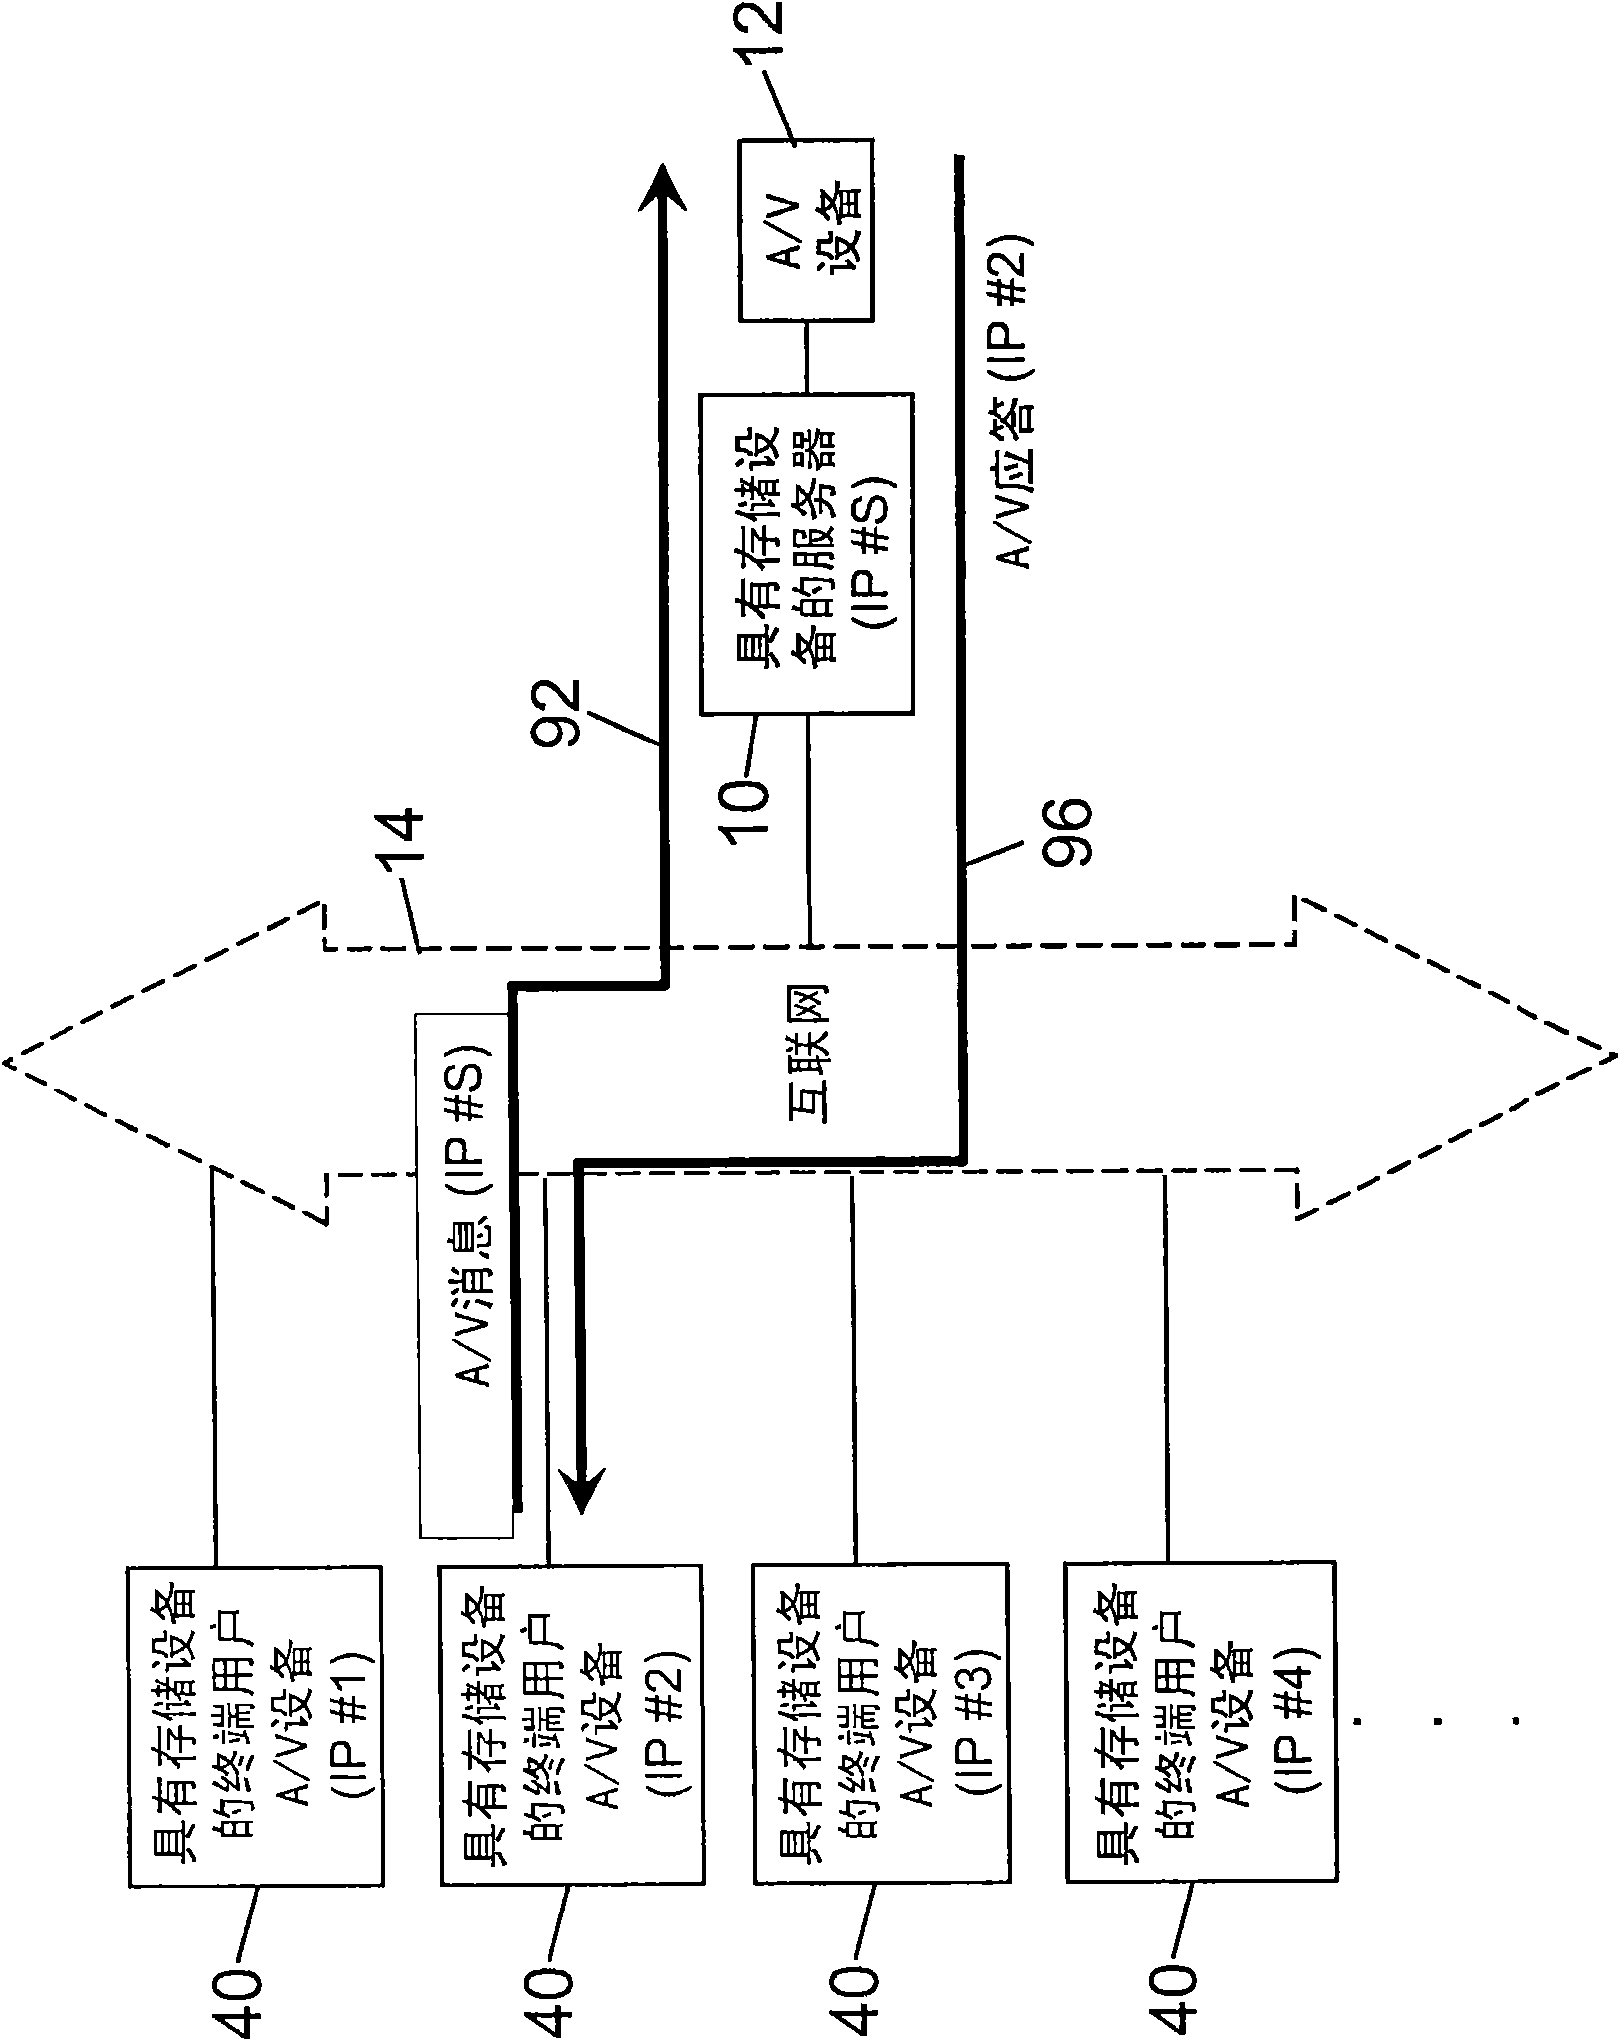 Medical video communication systems and methods